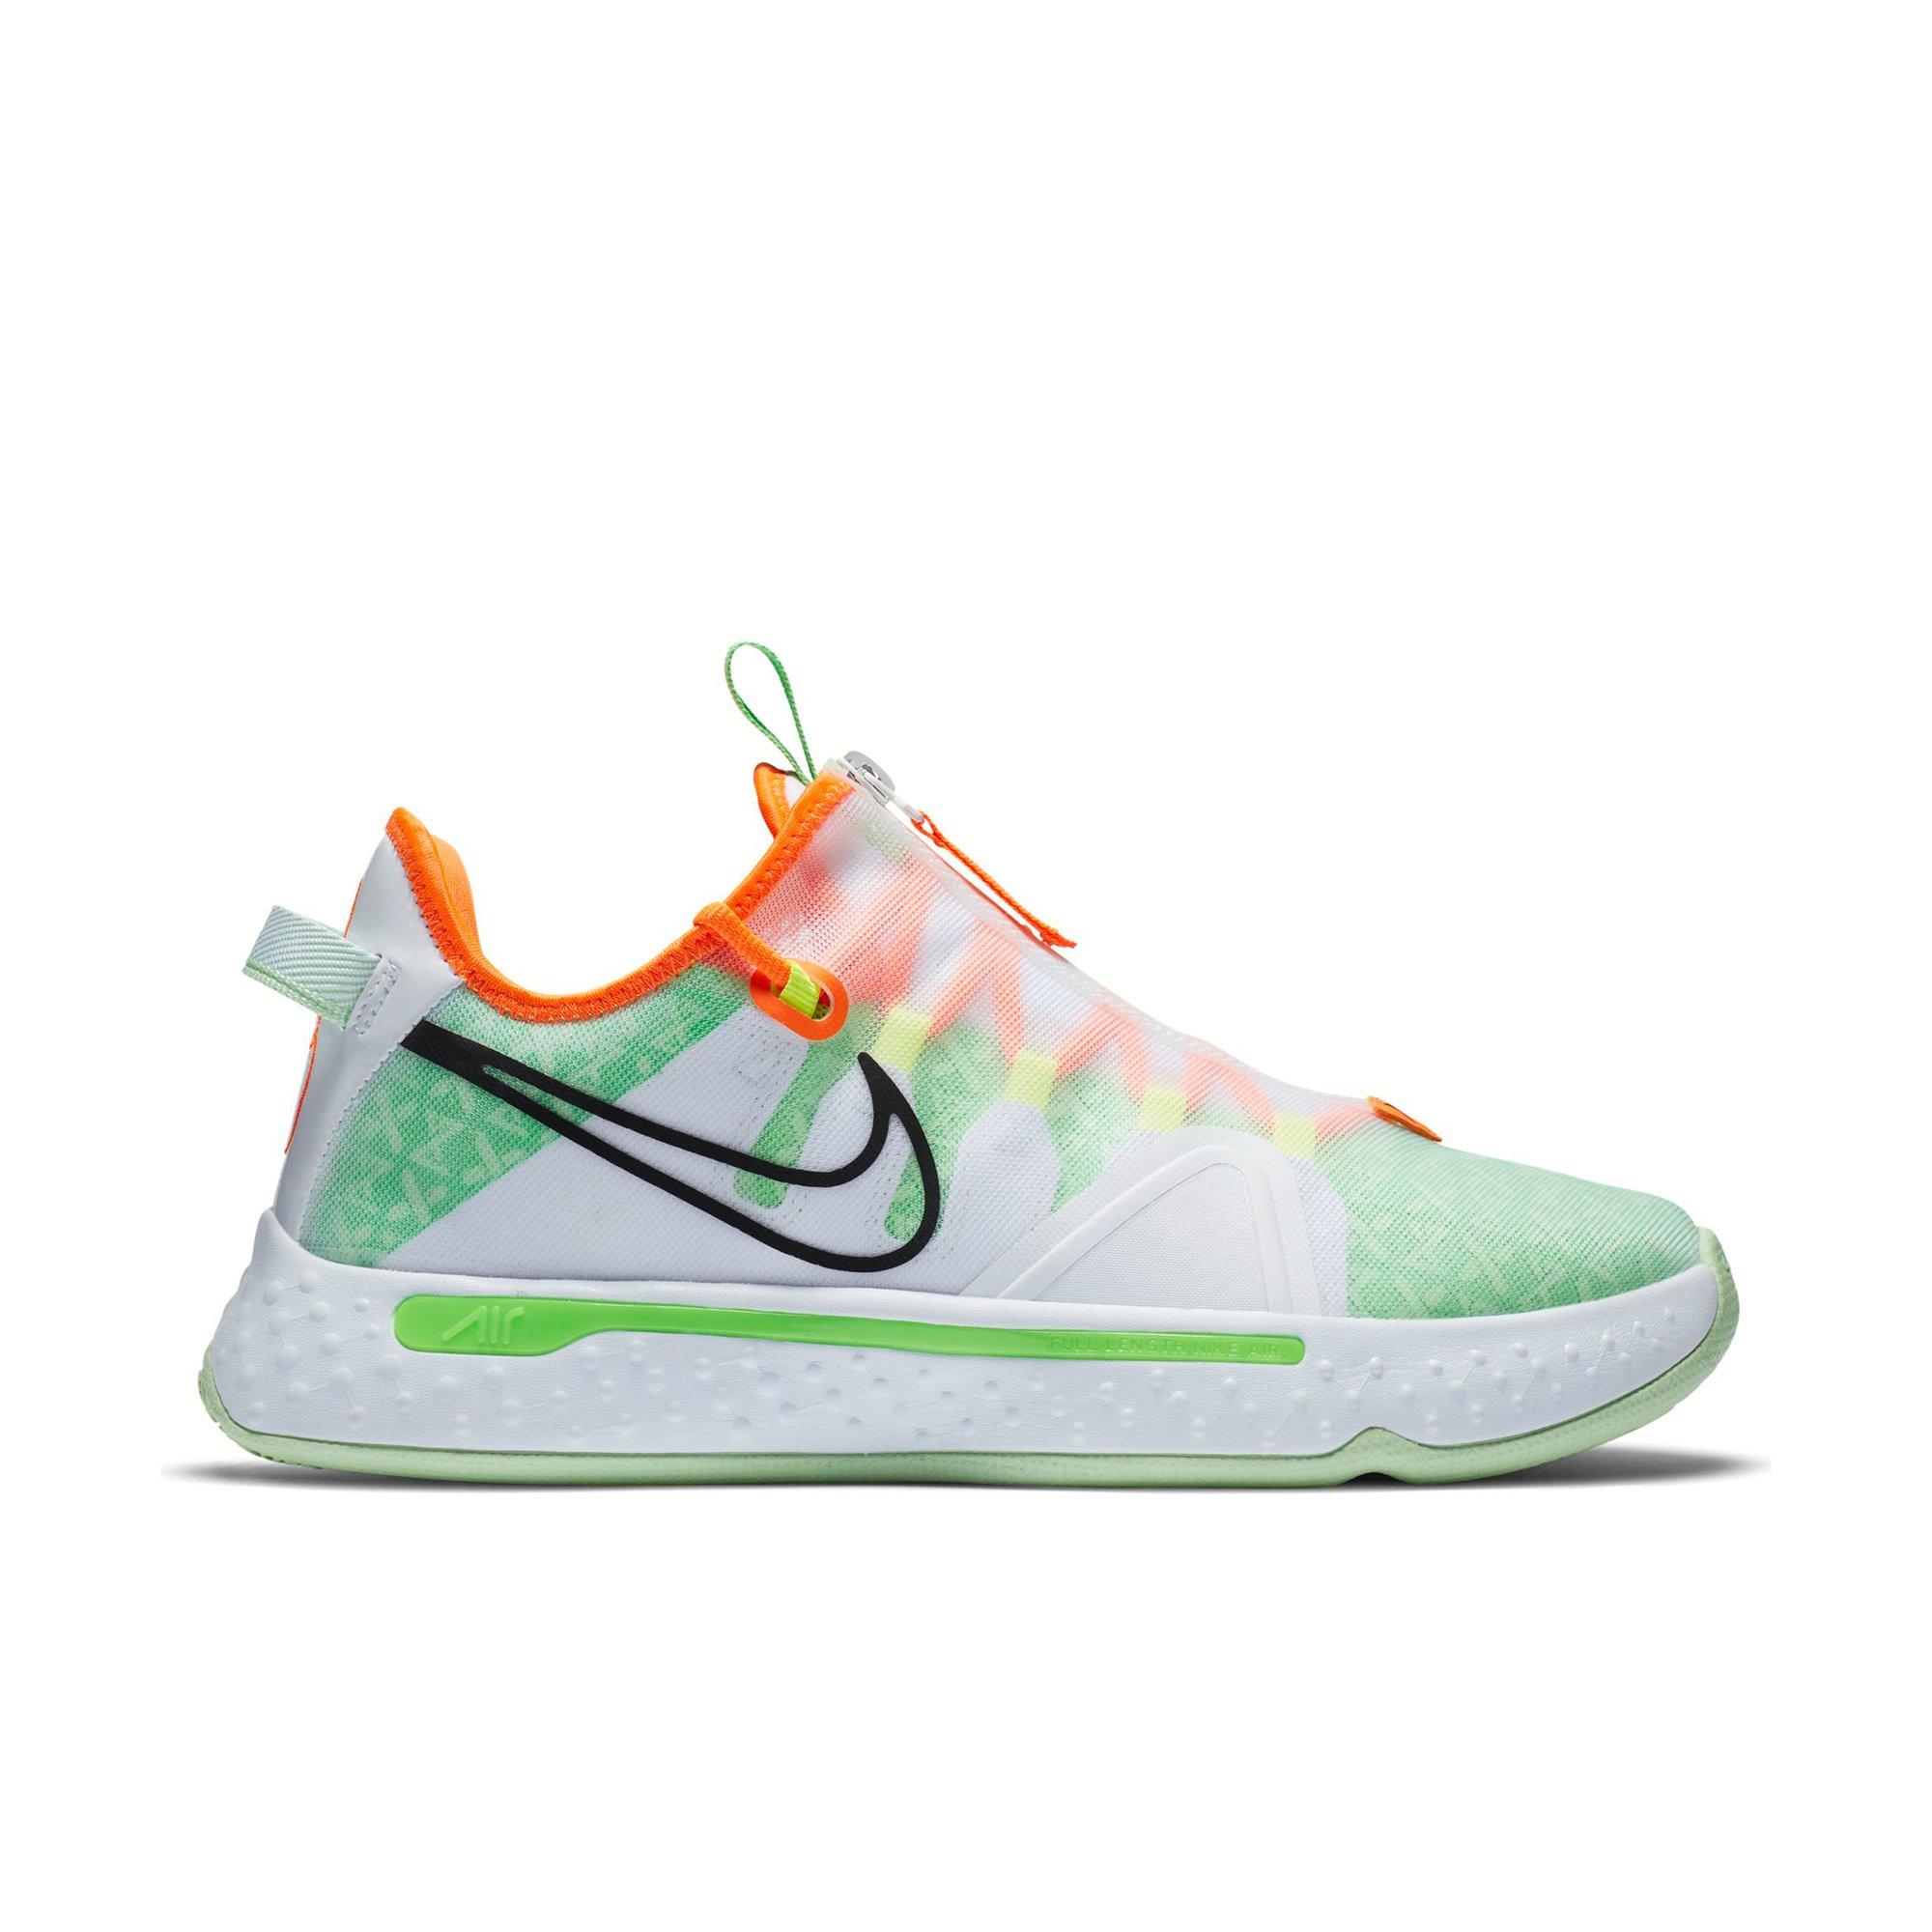 paul george shoes womens green